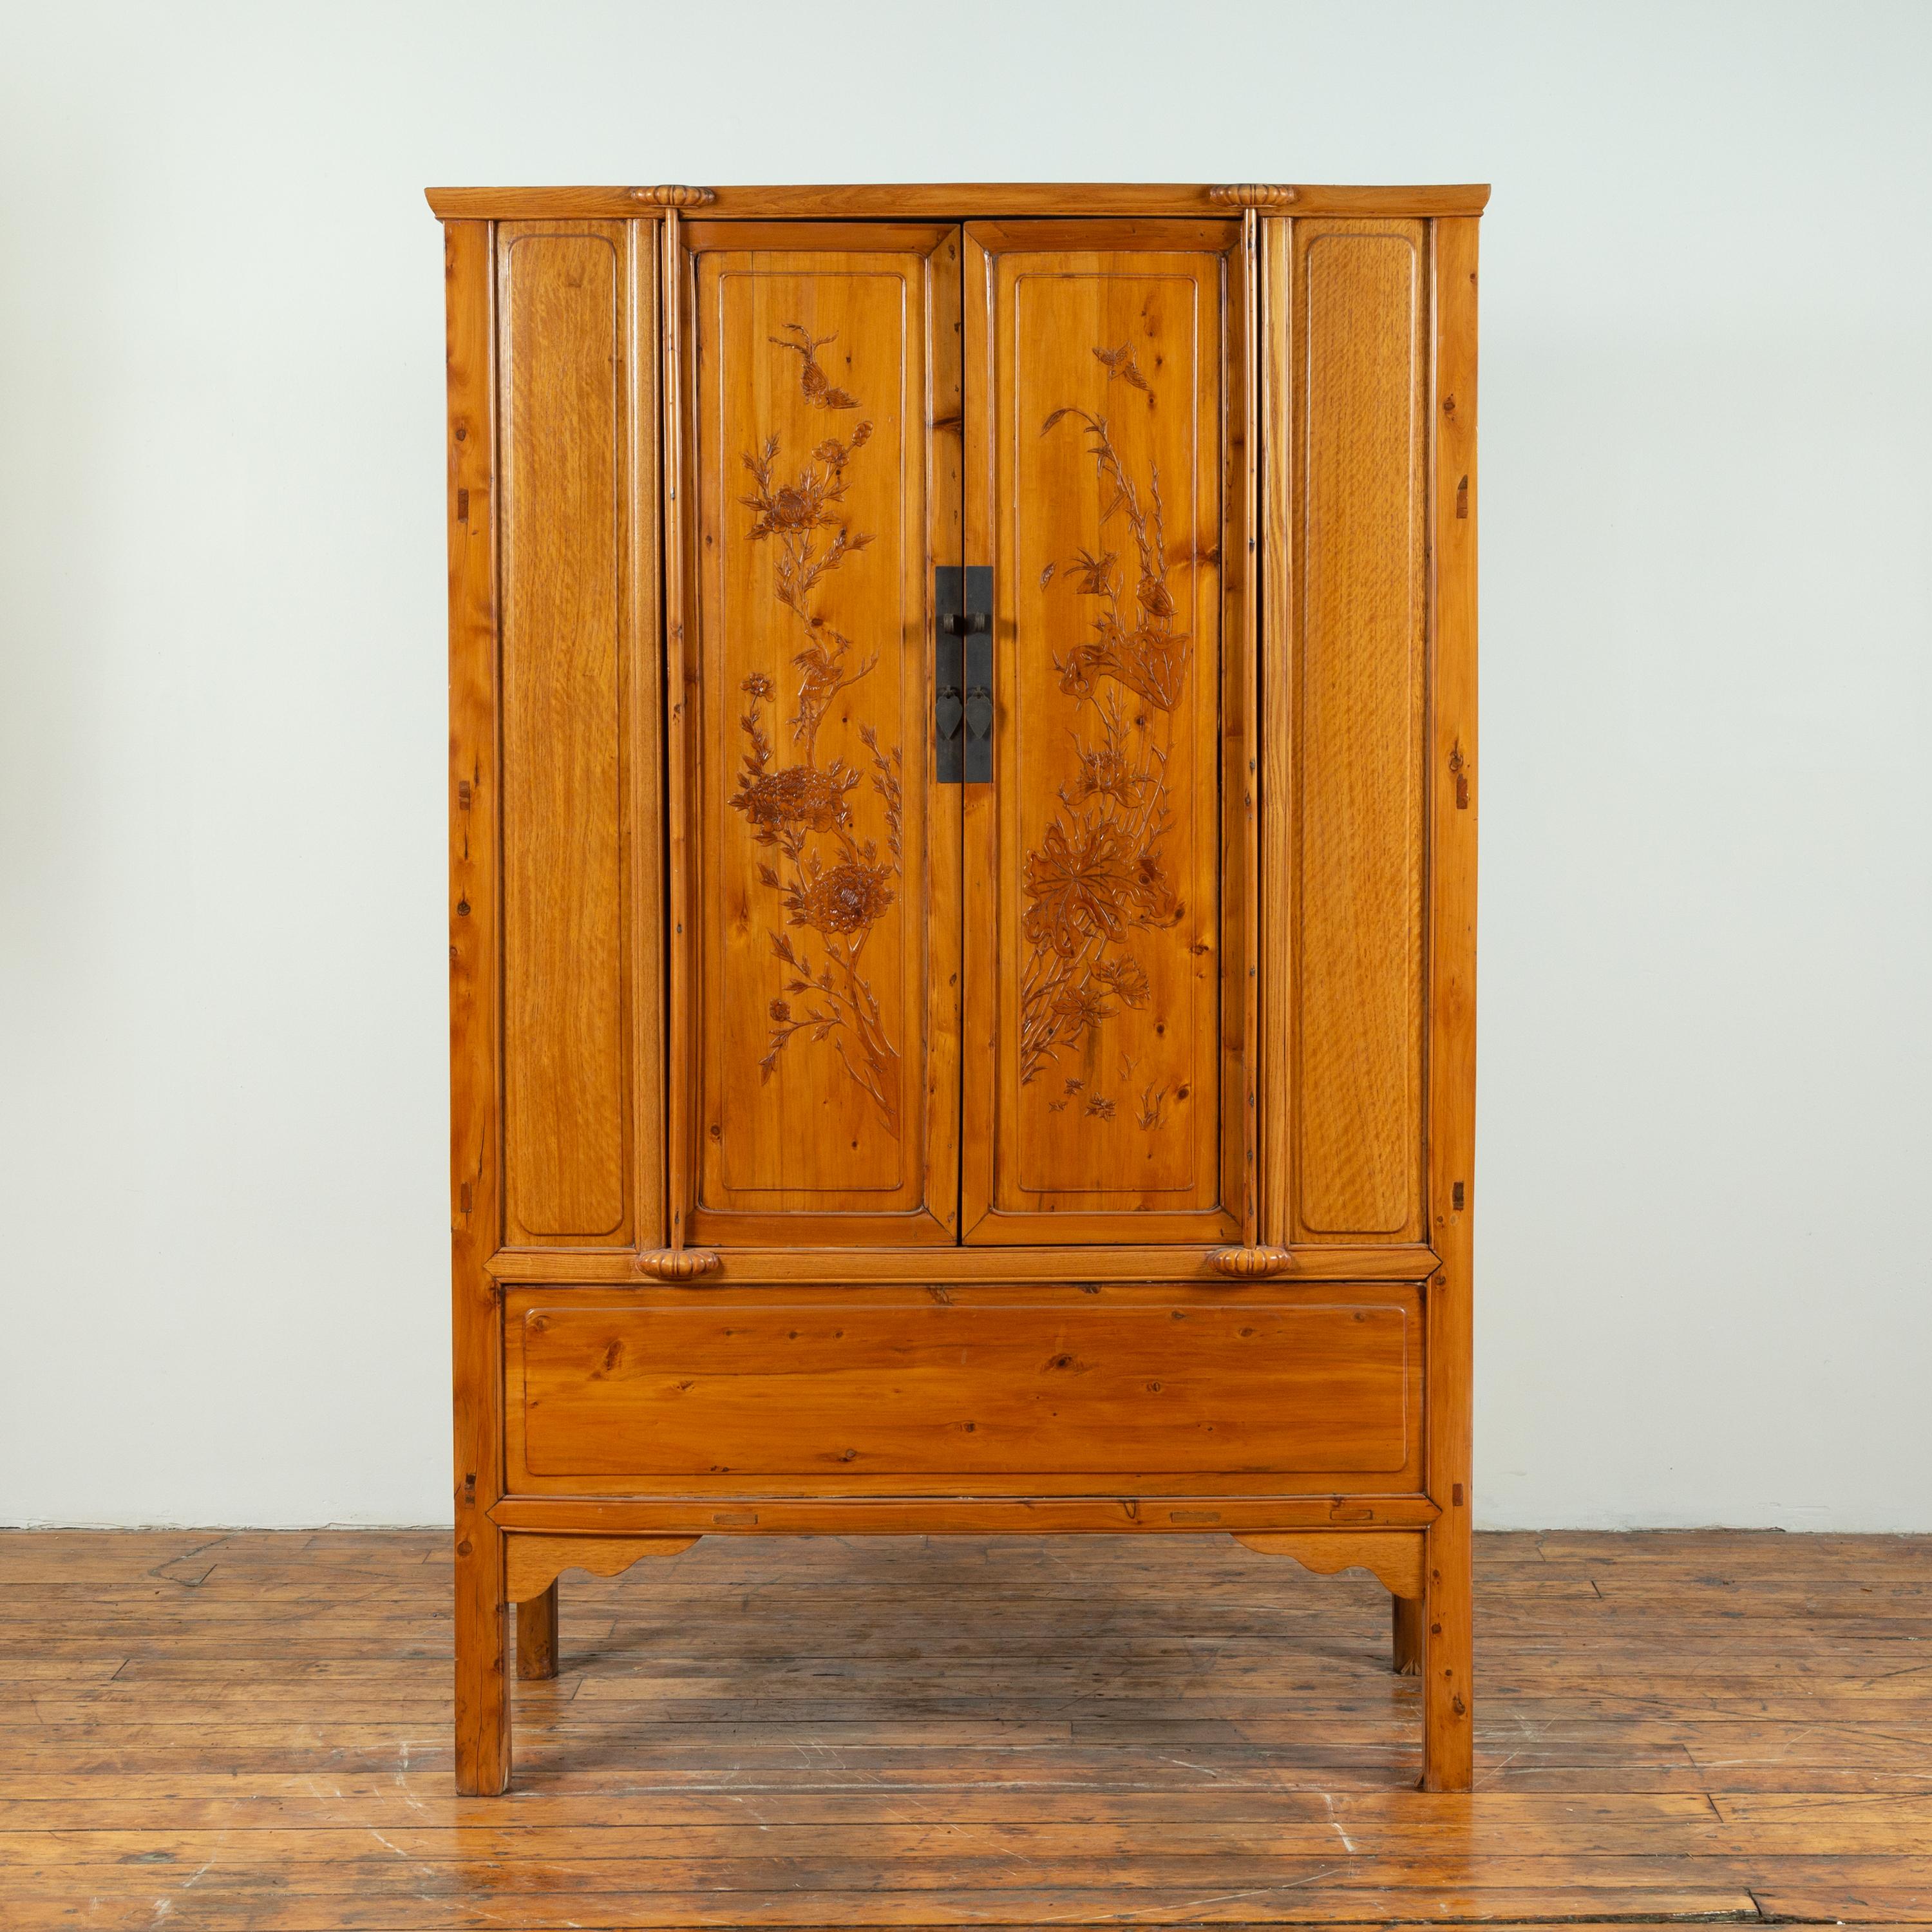 A vintage Ming Dynasty style natural wood two-door cabinet from the mid-20th century, with floral décor and hidden drawers. This mid-century cabinet, crafted in the style of the Ming Dynasty, exudes a timeless elegance with its natural wood and